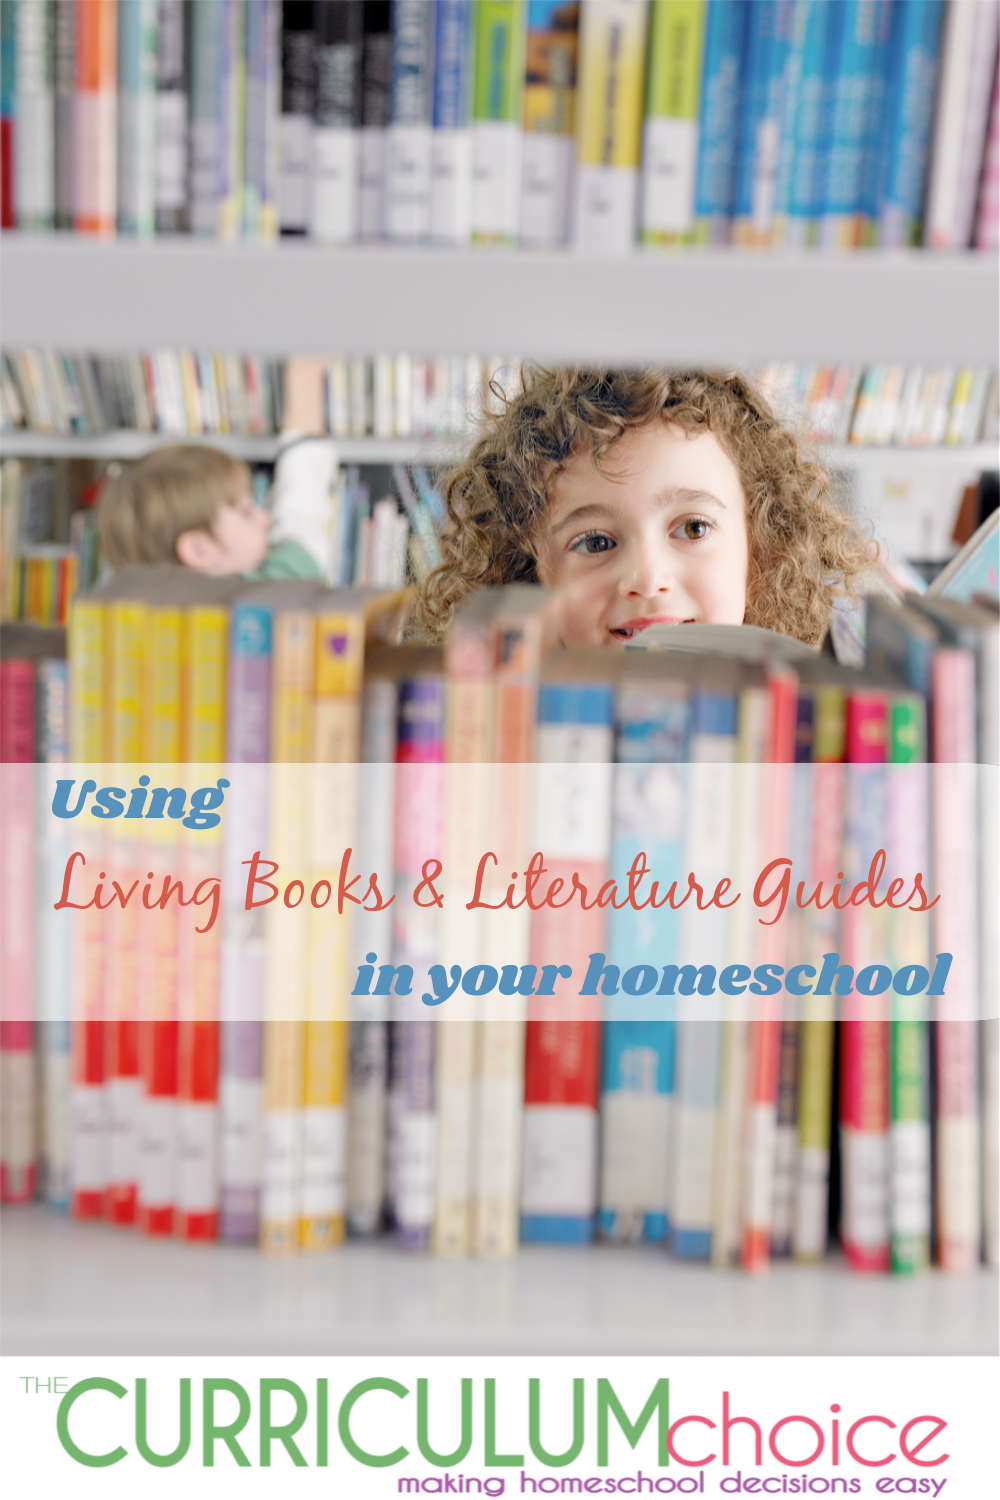 Using Living Books & Literature Guides are a wonderful way to enrich your child's learning in an engaging and meaningful way. They are also a wonderful way to engage multiple children at one time, using various levels of literature guides for the same book.